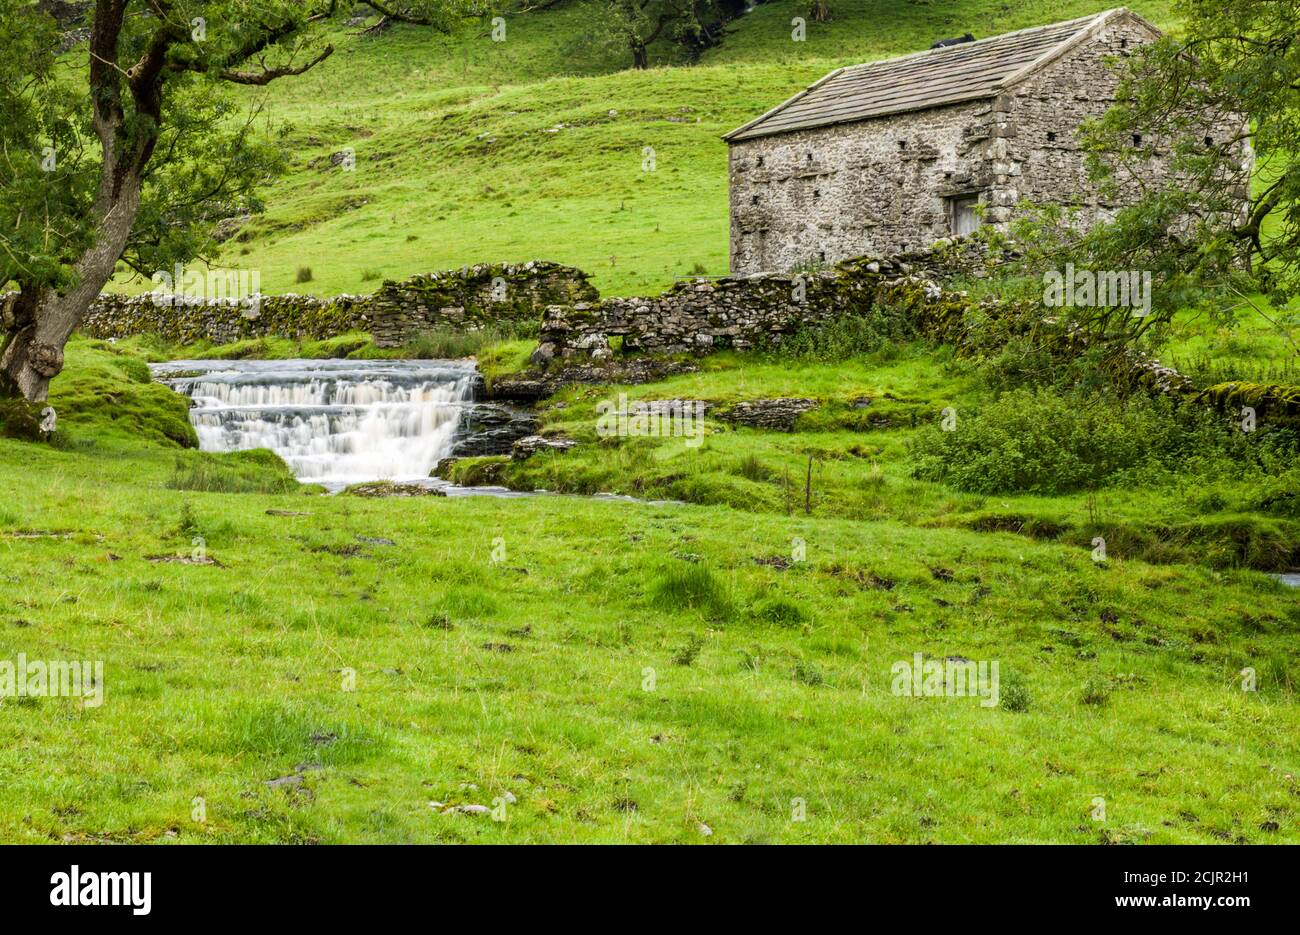 Waterfall and Dales barn at Cray, a small outpost on the road out of Upper Wharfedale to Bishopdale in the Yorkshire Dales National Park. Stock Photo